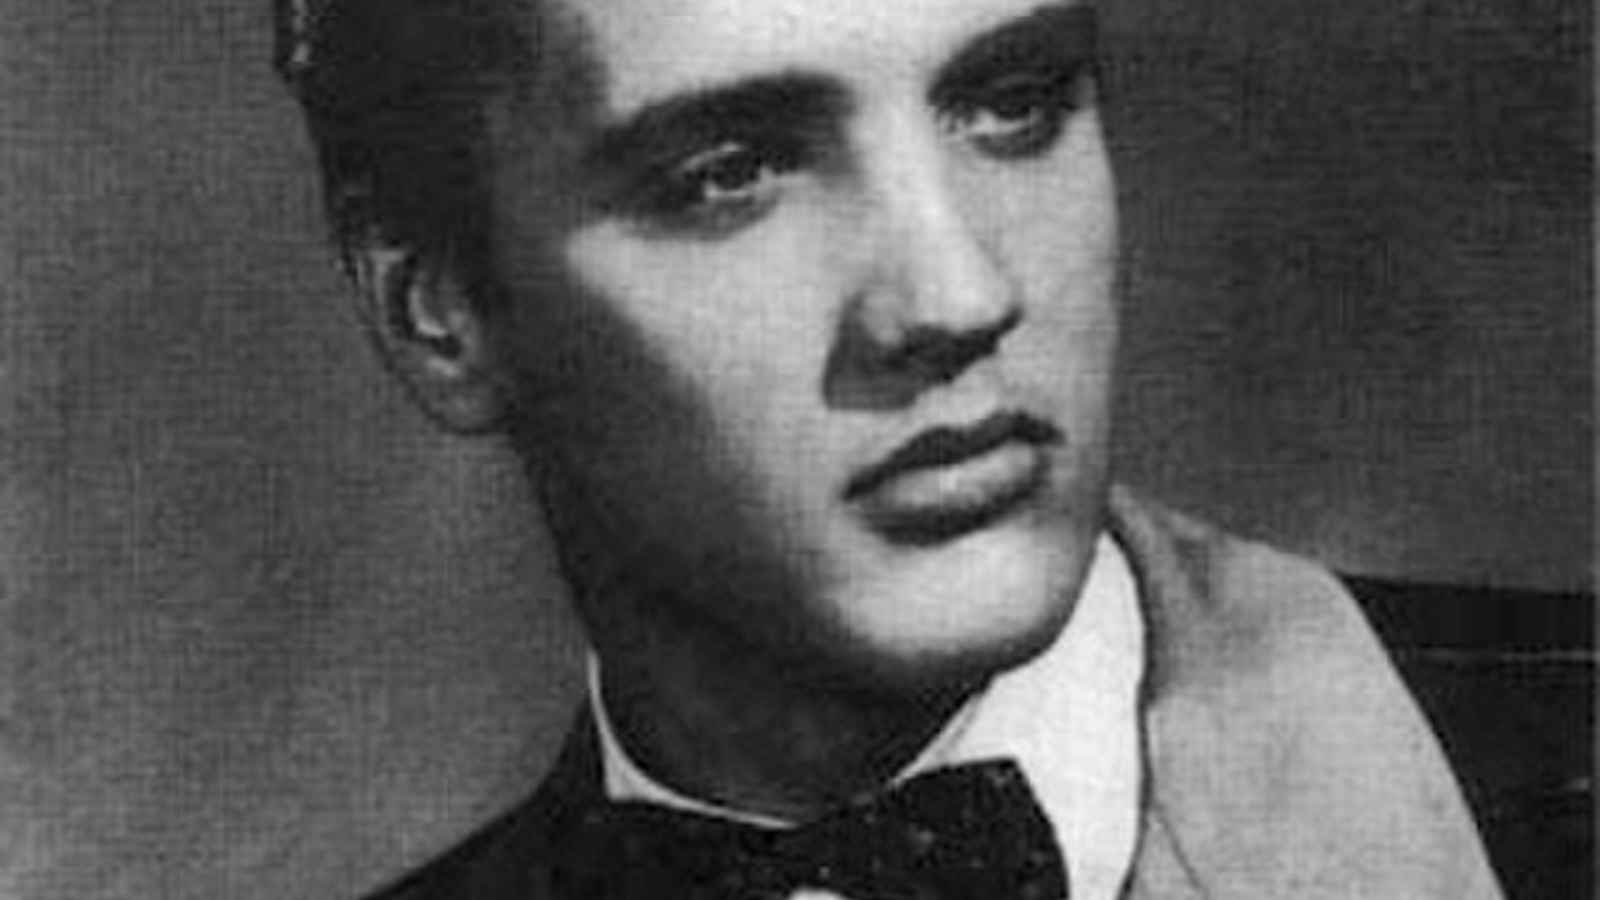 <p>This list wouldn’t be complete without including a romantic classic by “The King of Rock and Roll.” Elvis Presley’s iconic rendition of this song remains a fan favorite, with its sweet lyrics and melody that perfectly capture the feeling of falling in love, makes this song a timeless choice for any romantic occasion.</p>